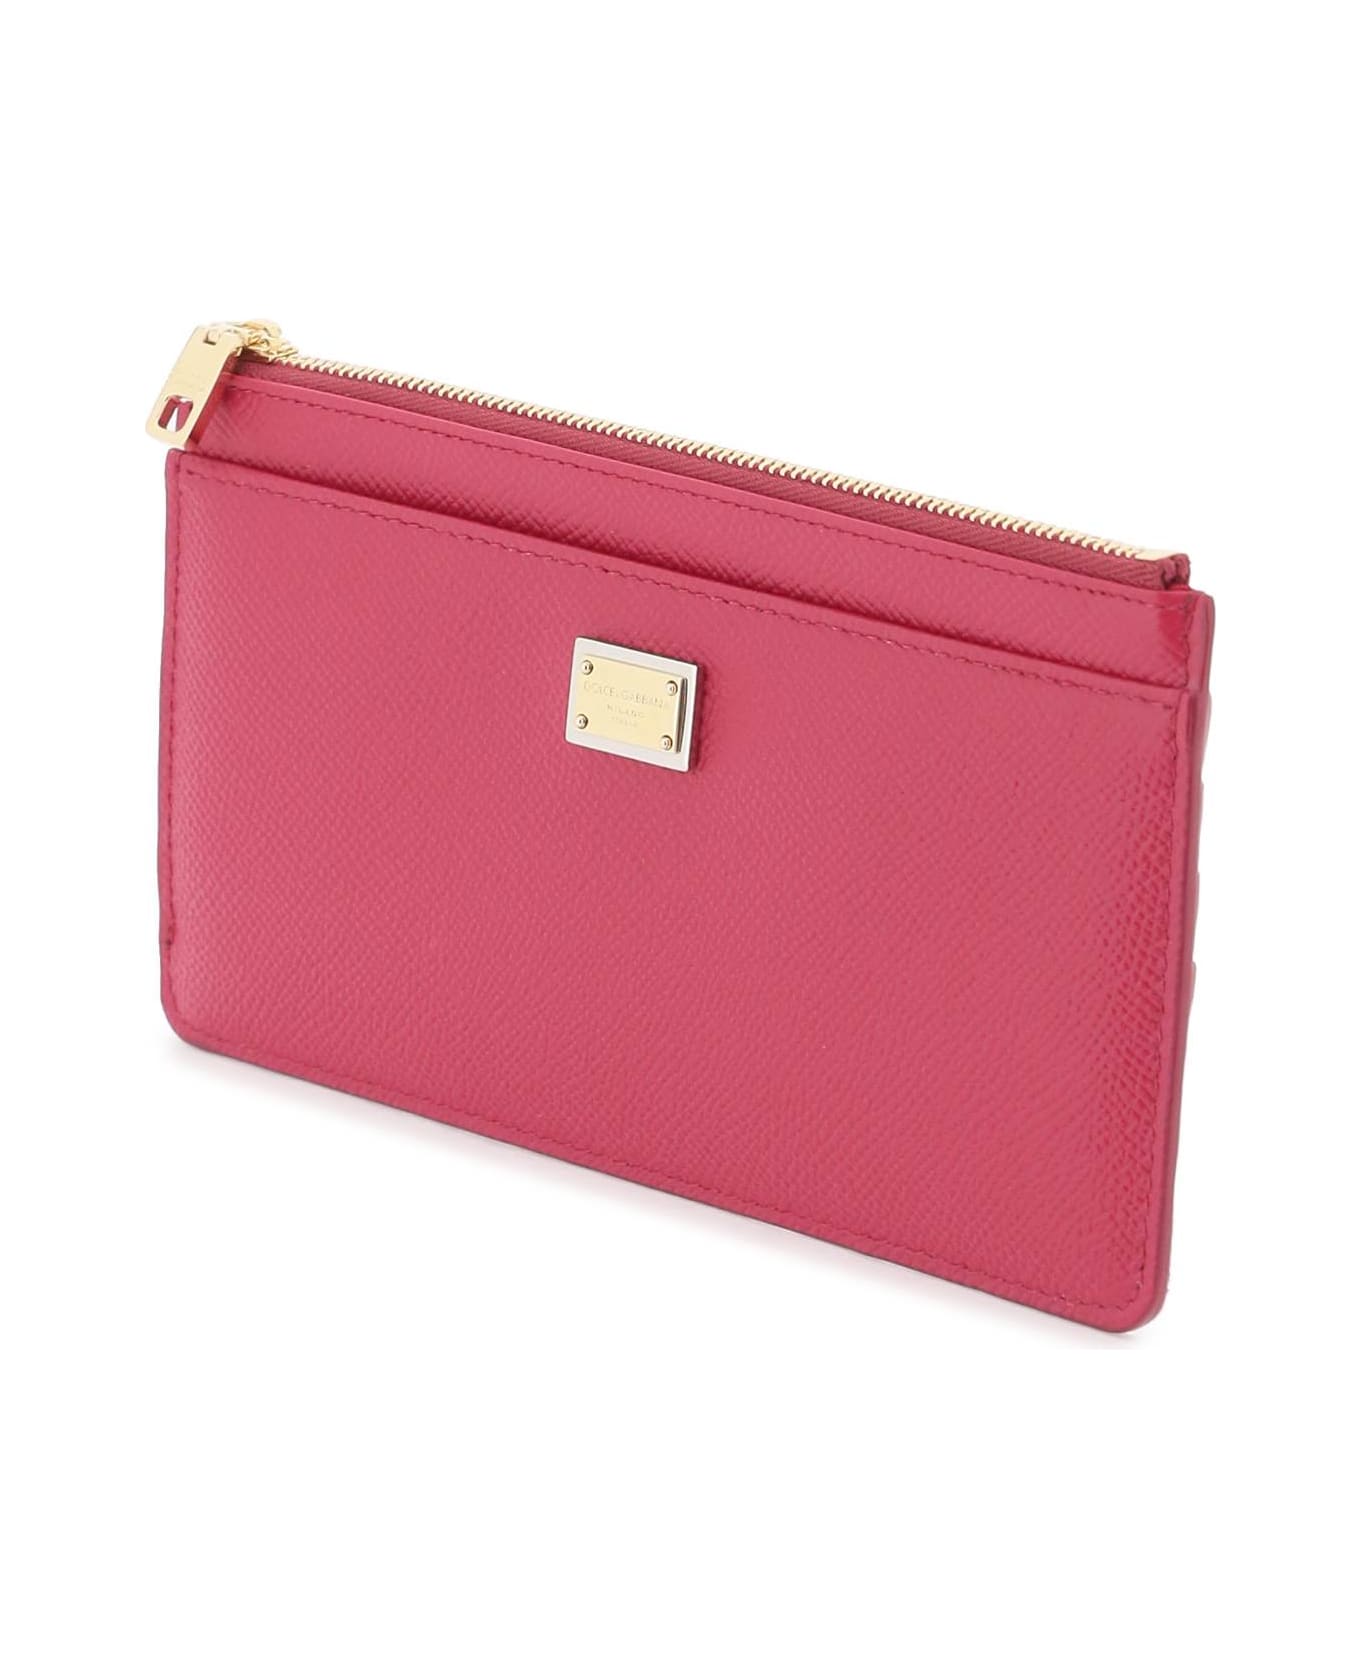 Dolce & Gabbana Cardholder Pouch In Dauphine Calfskin - CICLAMINO (Pink)